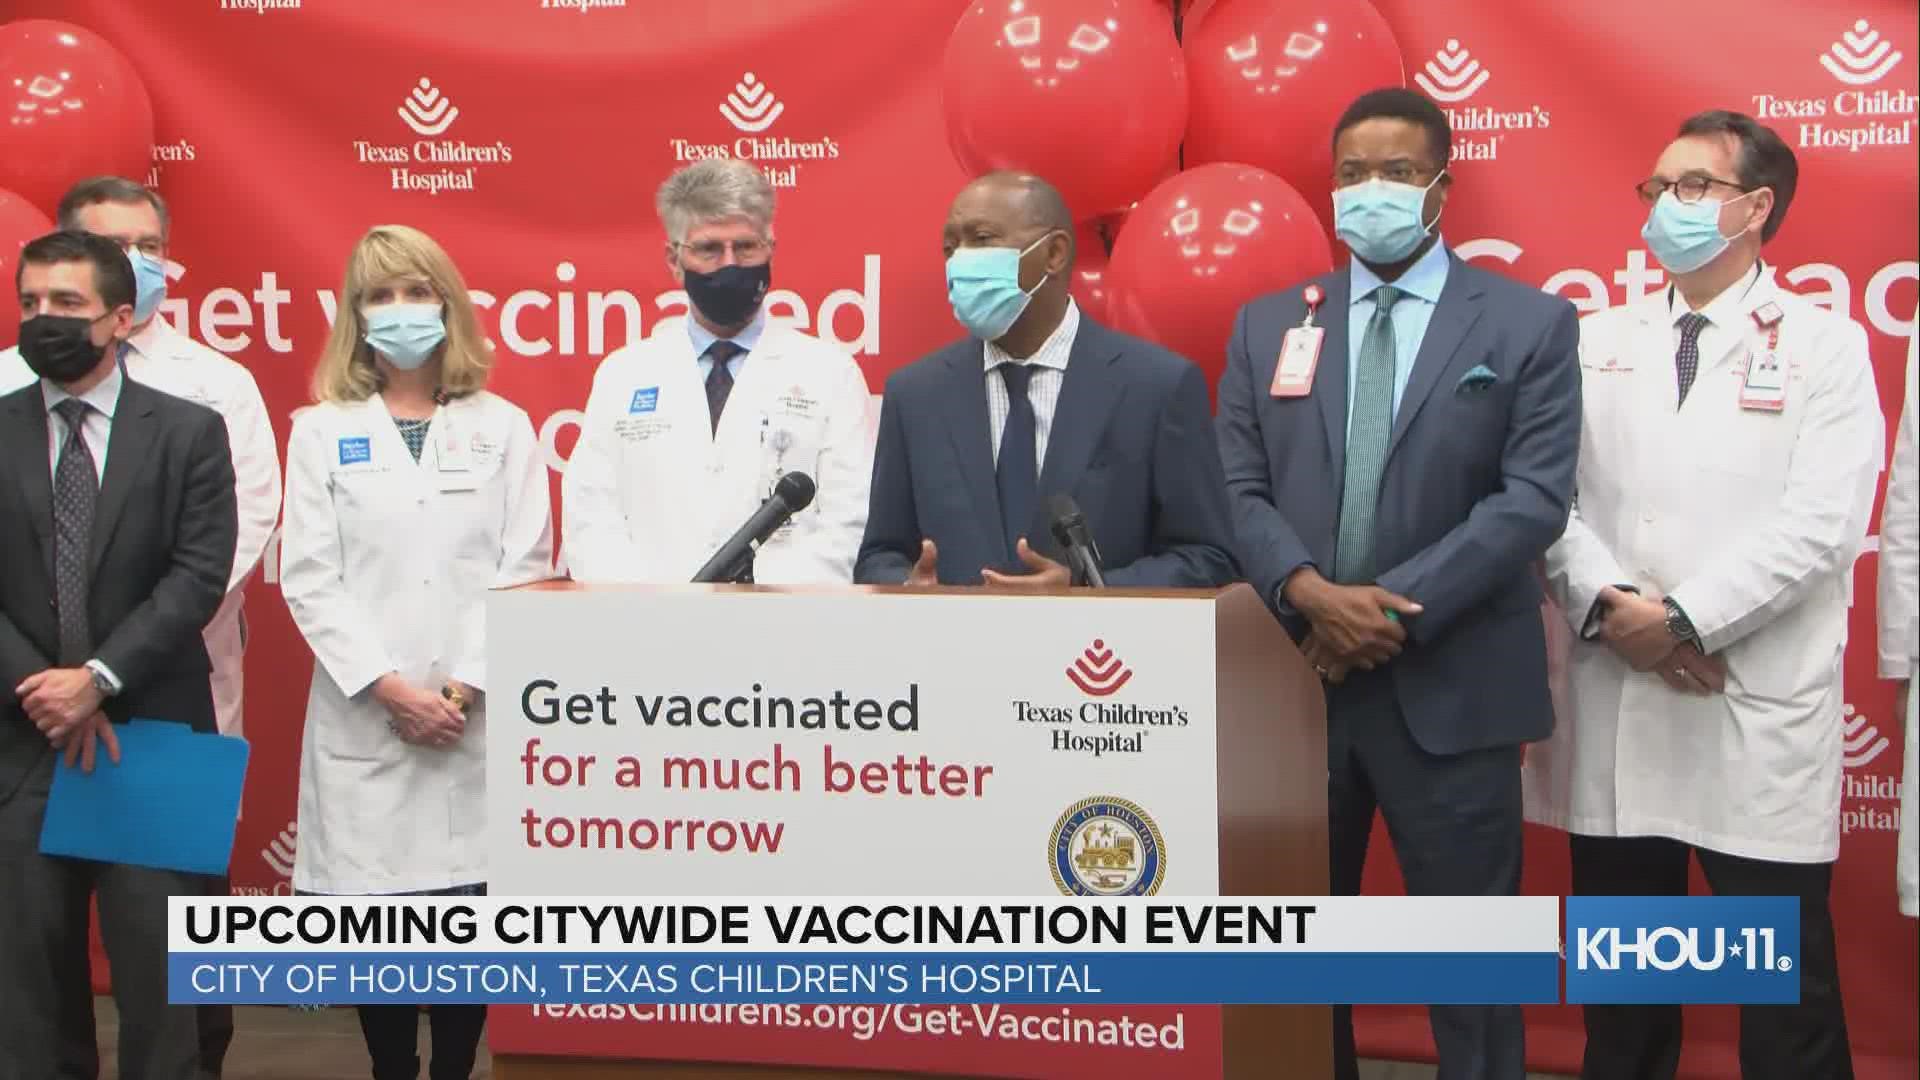 The City of Houston along with Texas Children's Hospital is planning a vaccination clinic for Friday, Dec. 17 at the George R. Brown Convention Center.